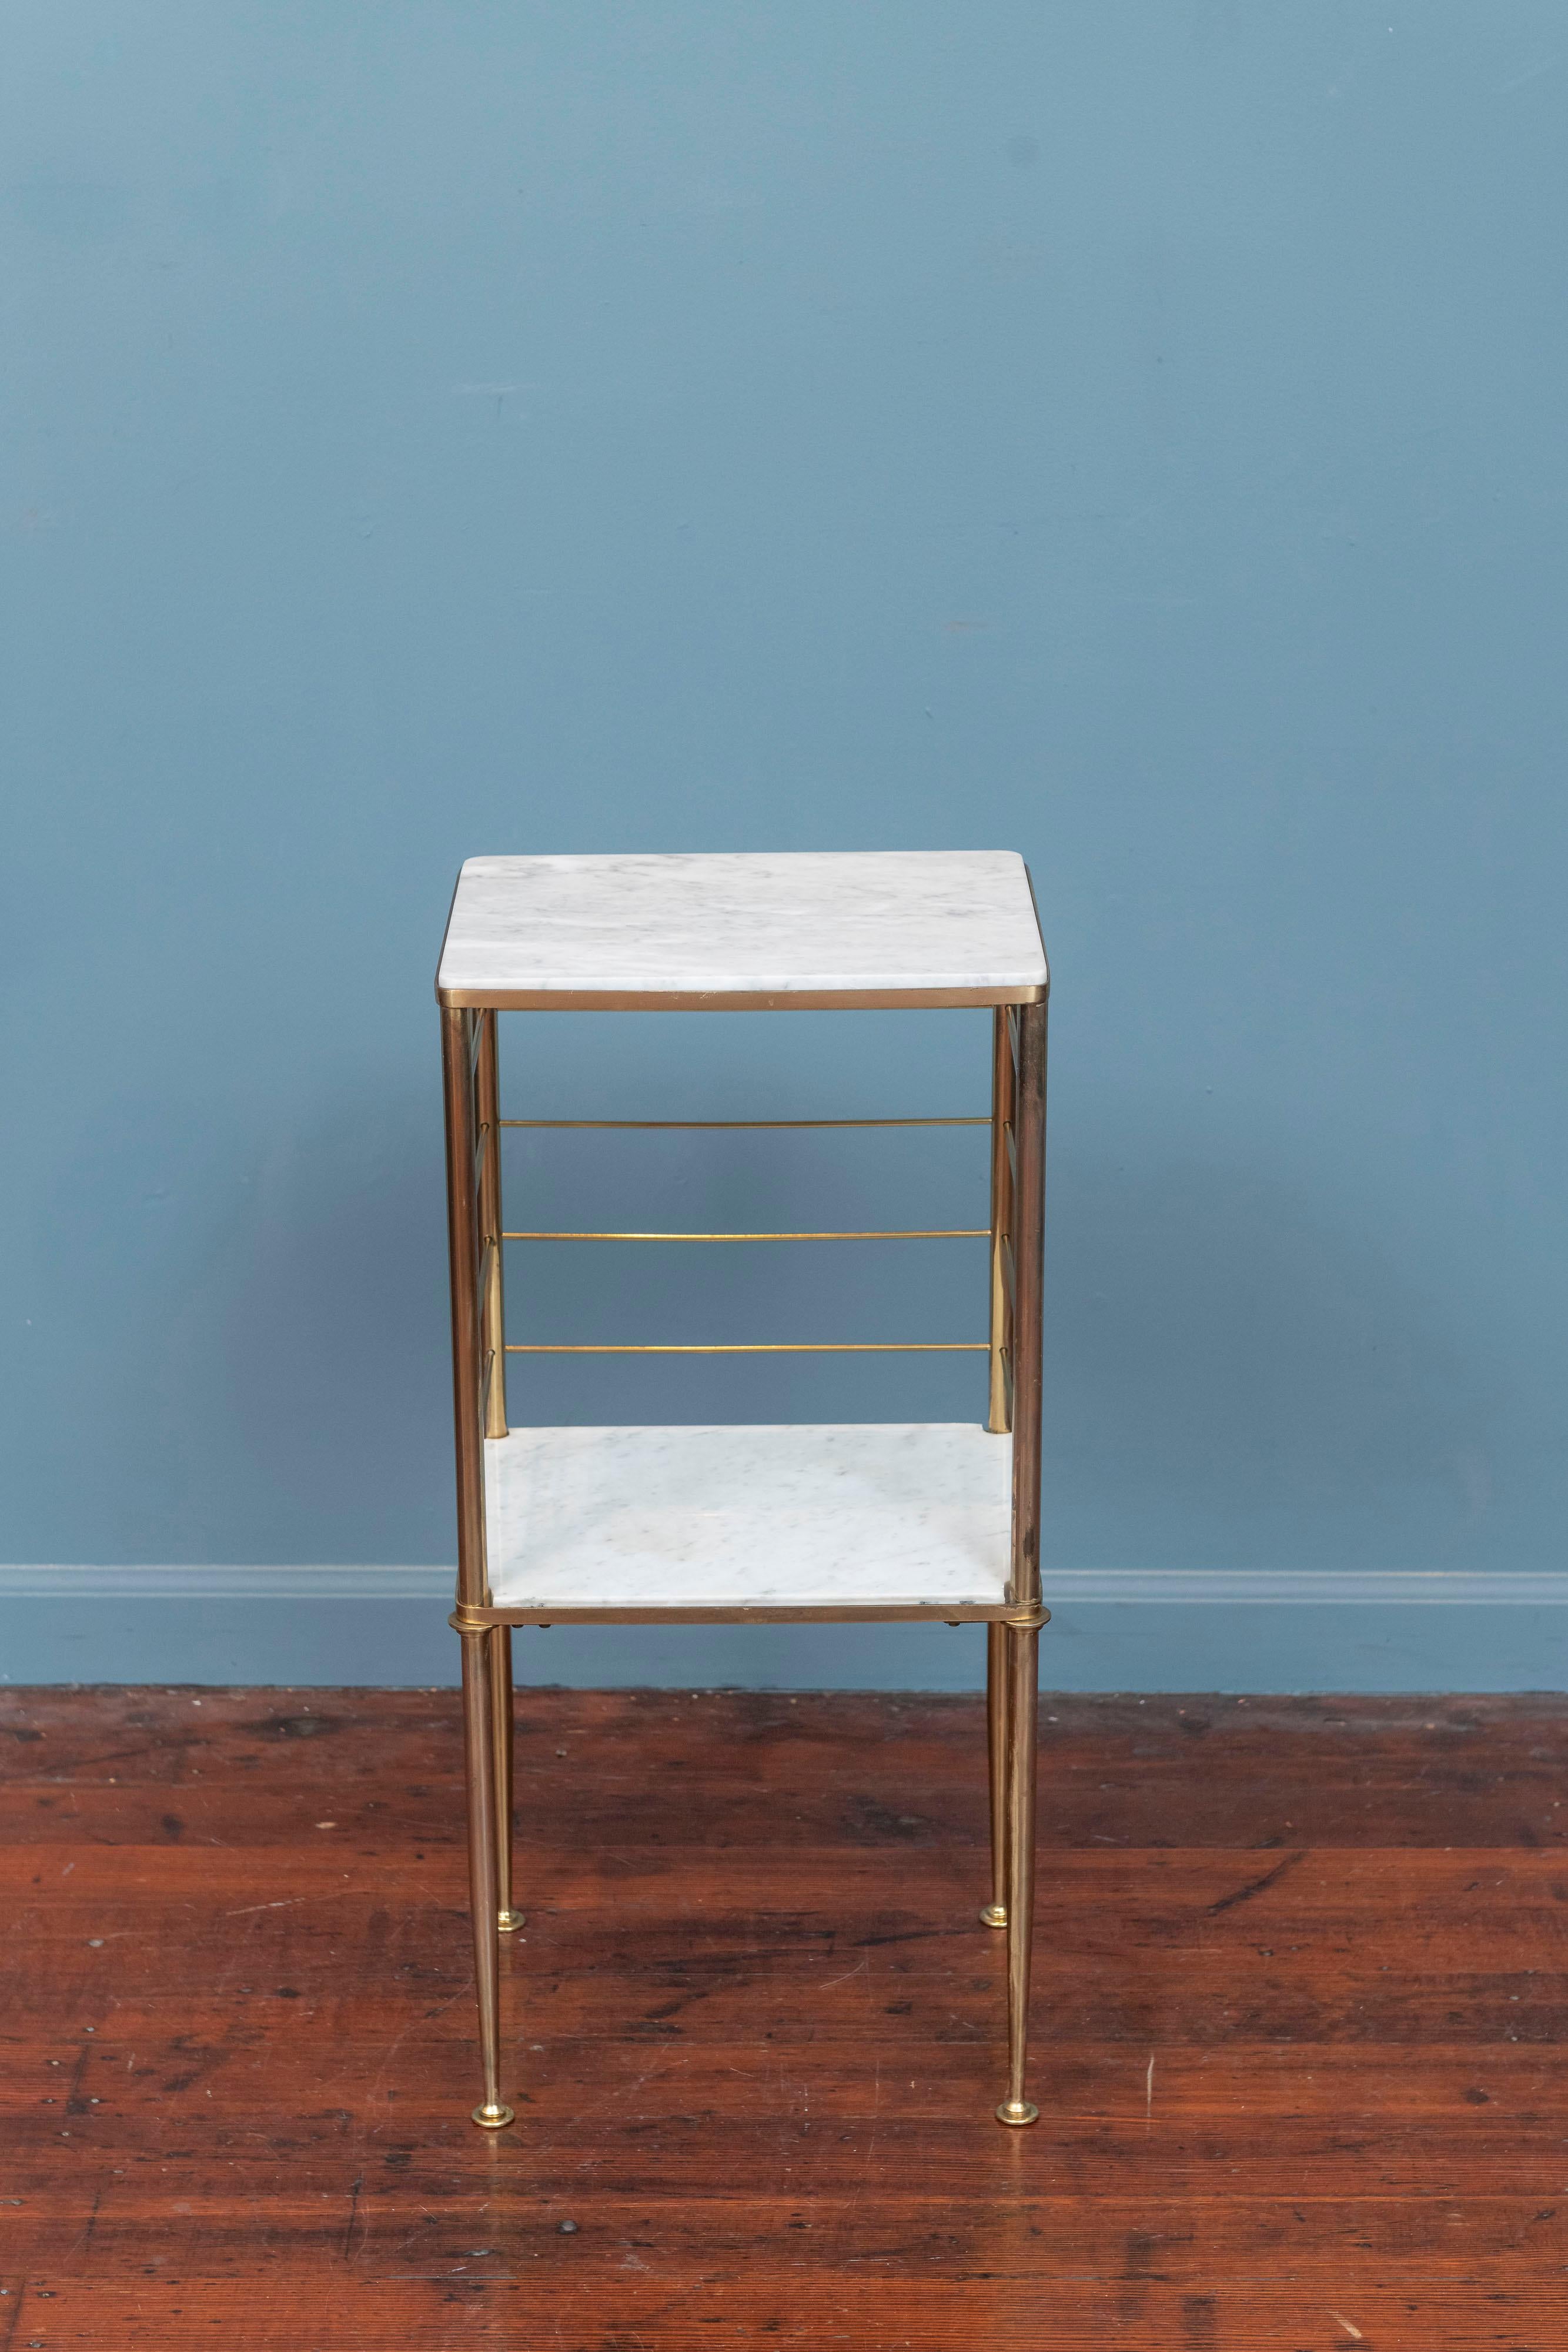 Italian midcentury brass and carrara marble drinks table or stand. Lovely compact table with 13